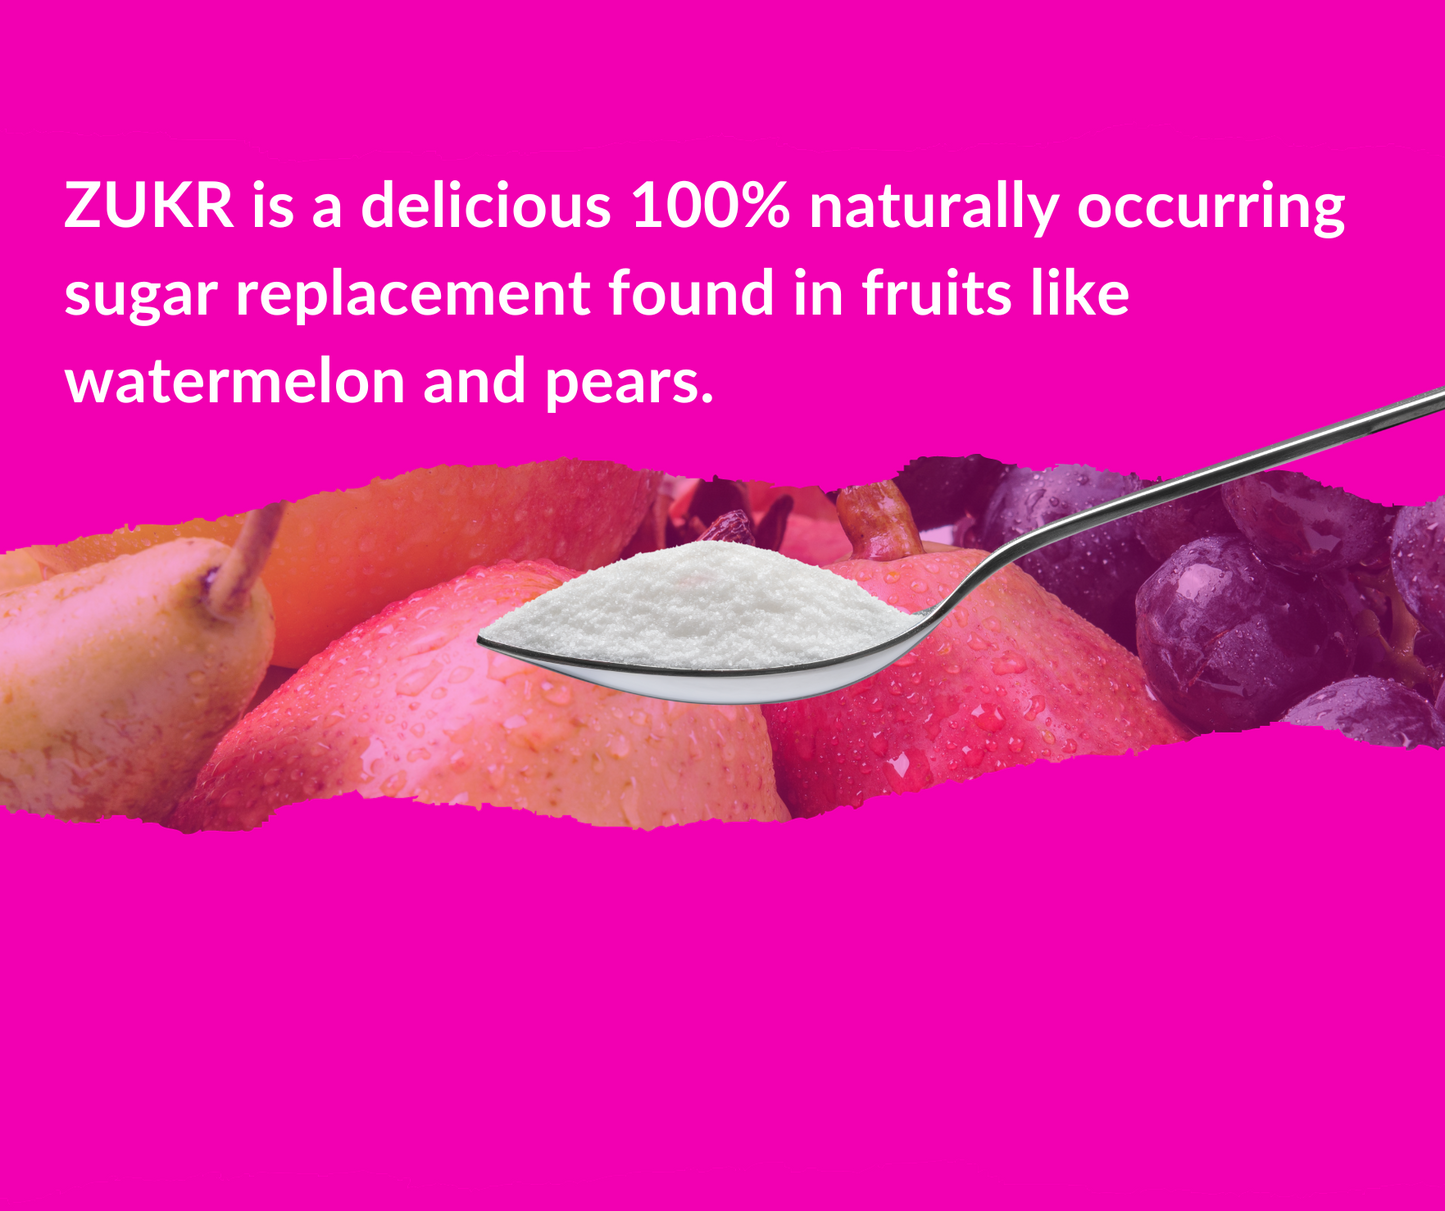 A heaping spoonful of ZUKR Natural Organic Sugar Replacement, nestled against its eye-catching pink packaging, beckons health-conscious consumers seeking a guilt-free alternative to traditional sweeteners. ZUKR's granulated texture and sparkling white hue evoke the sweetness of sugar without any of the undesirable health implications, making it a popular choice for those following keto, vegan, and paleo diets.